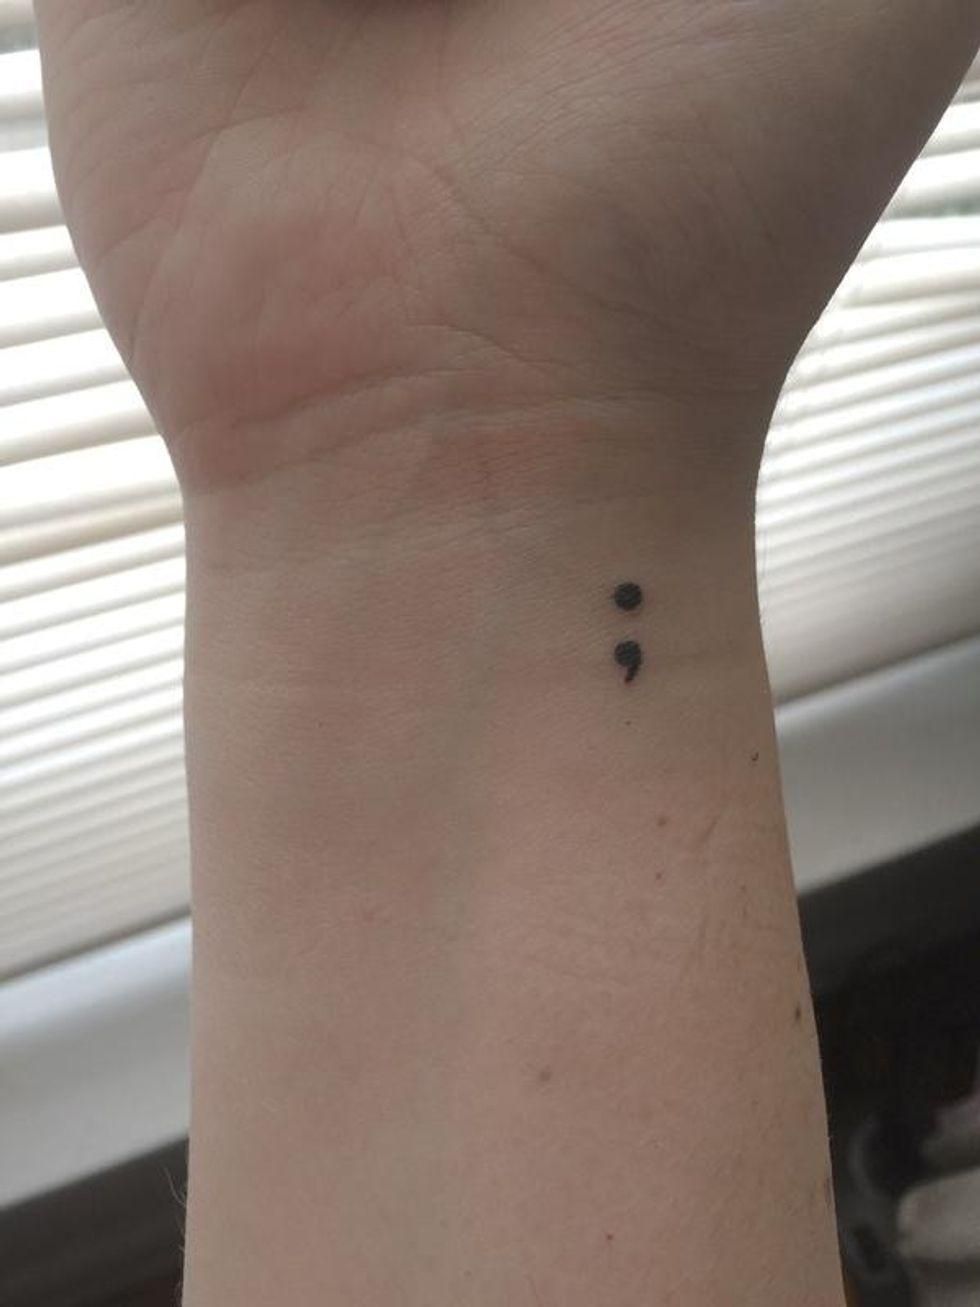 85 Semicolon Tattoo Designs and Their Meaning - AuthorityTattoo